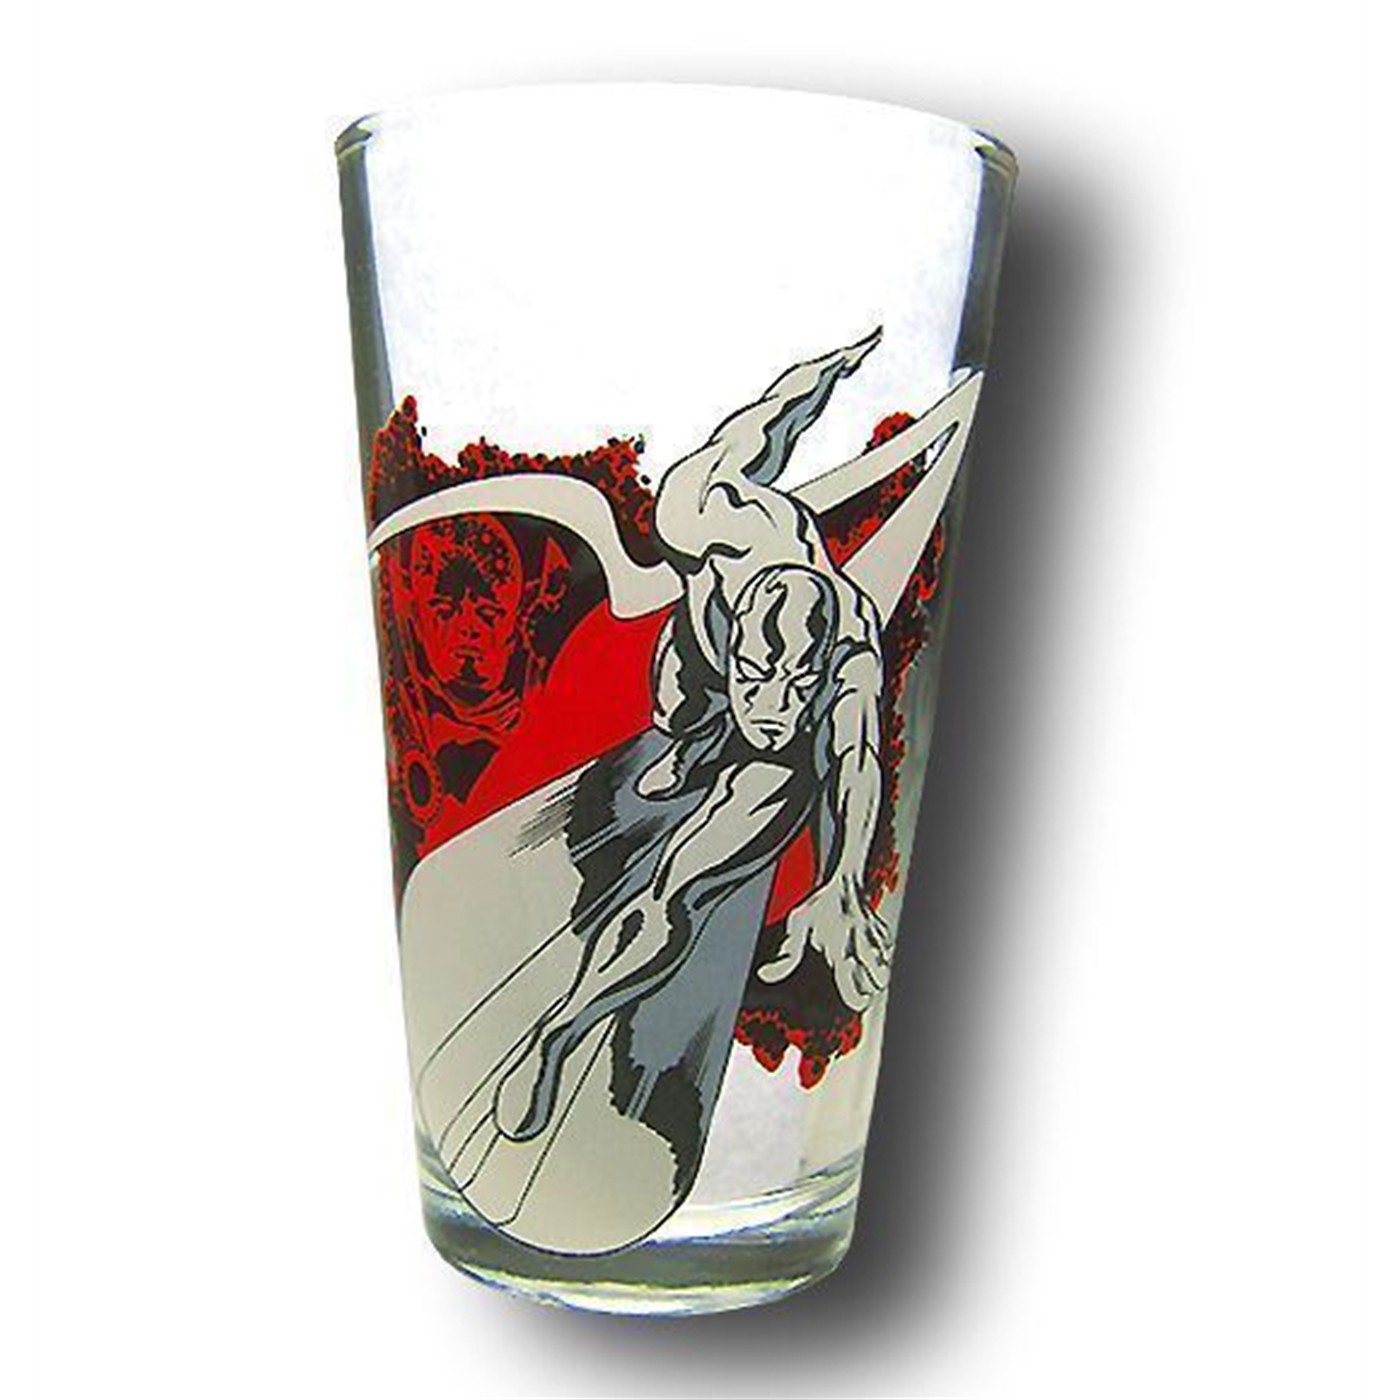 Silver Surfer Clear Pint Glass